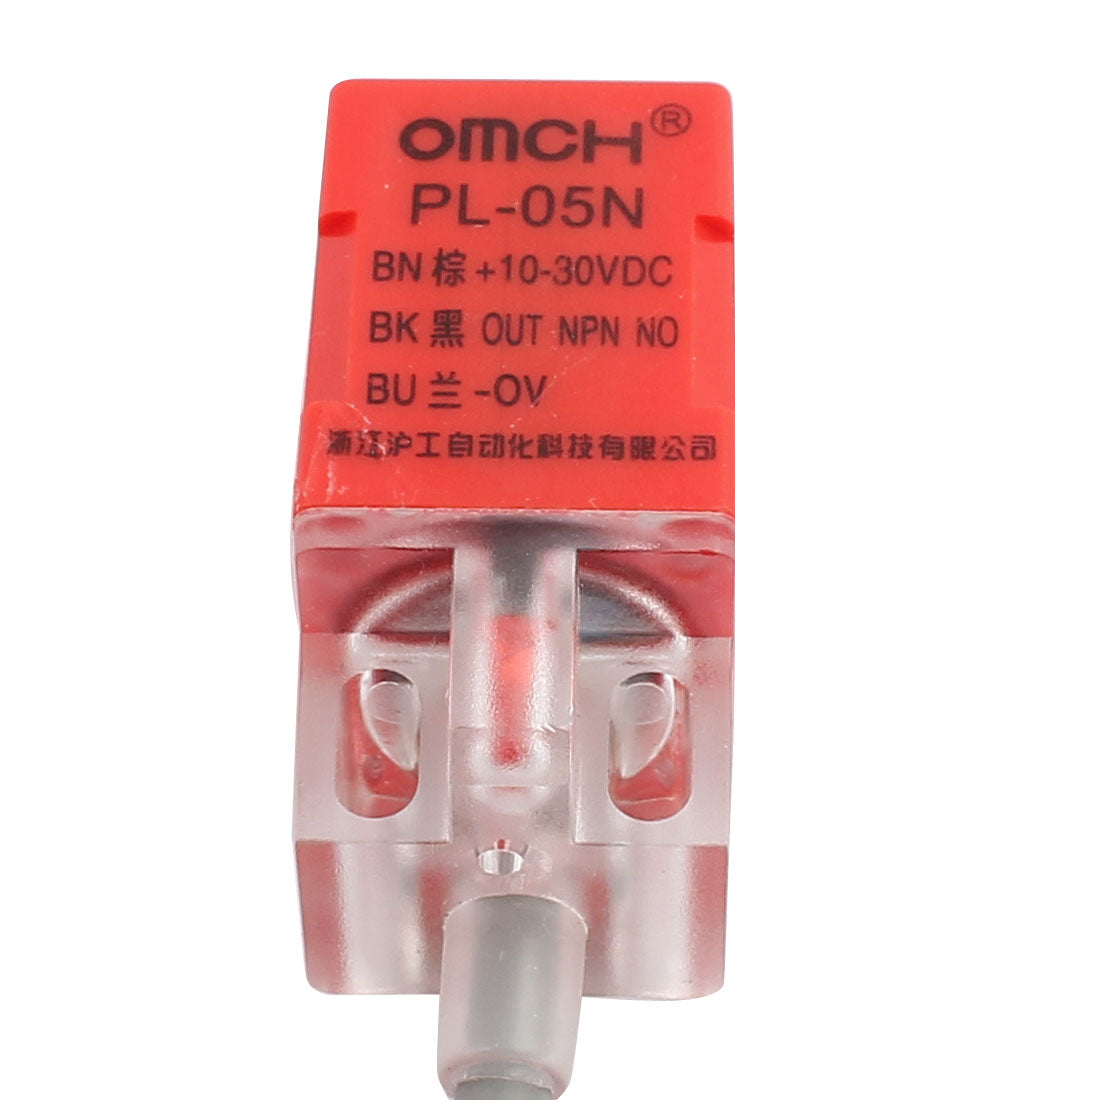 uxcell Uxcell PL-05N DC 10-30V NPN NO 5mm Square Inductive Proximity Sensor Switch 3-wire